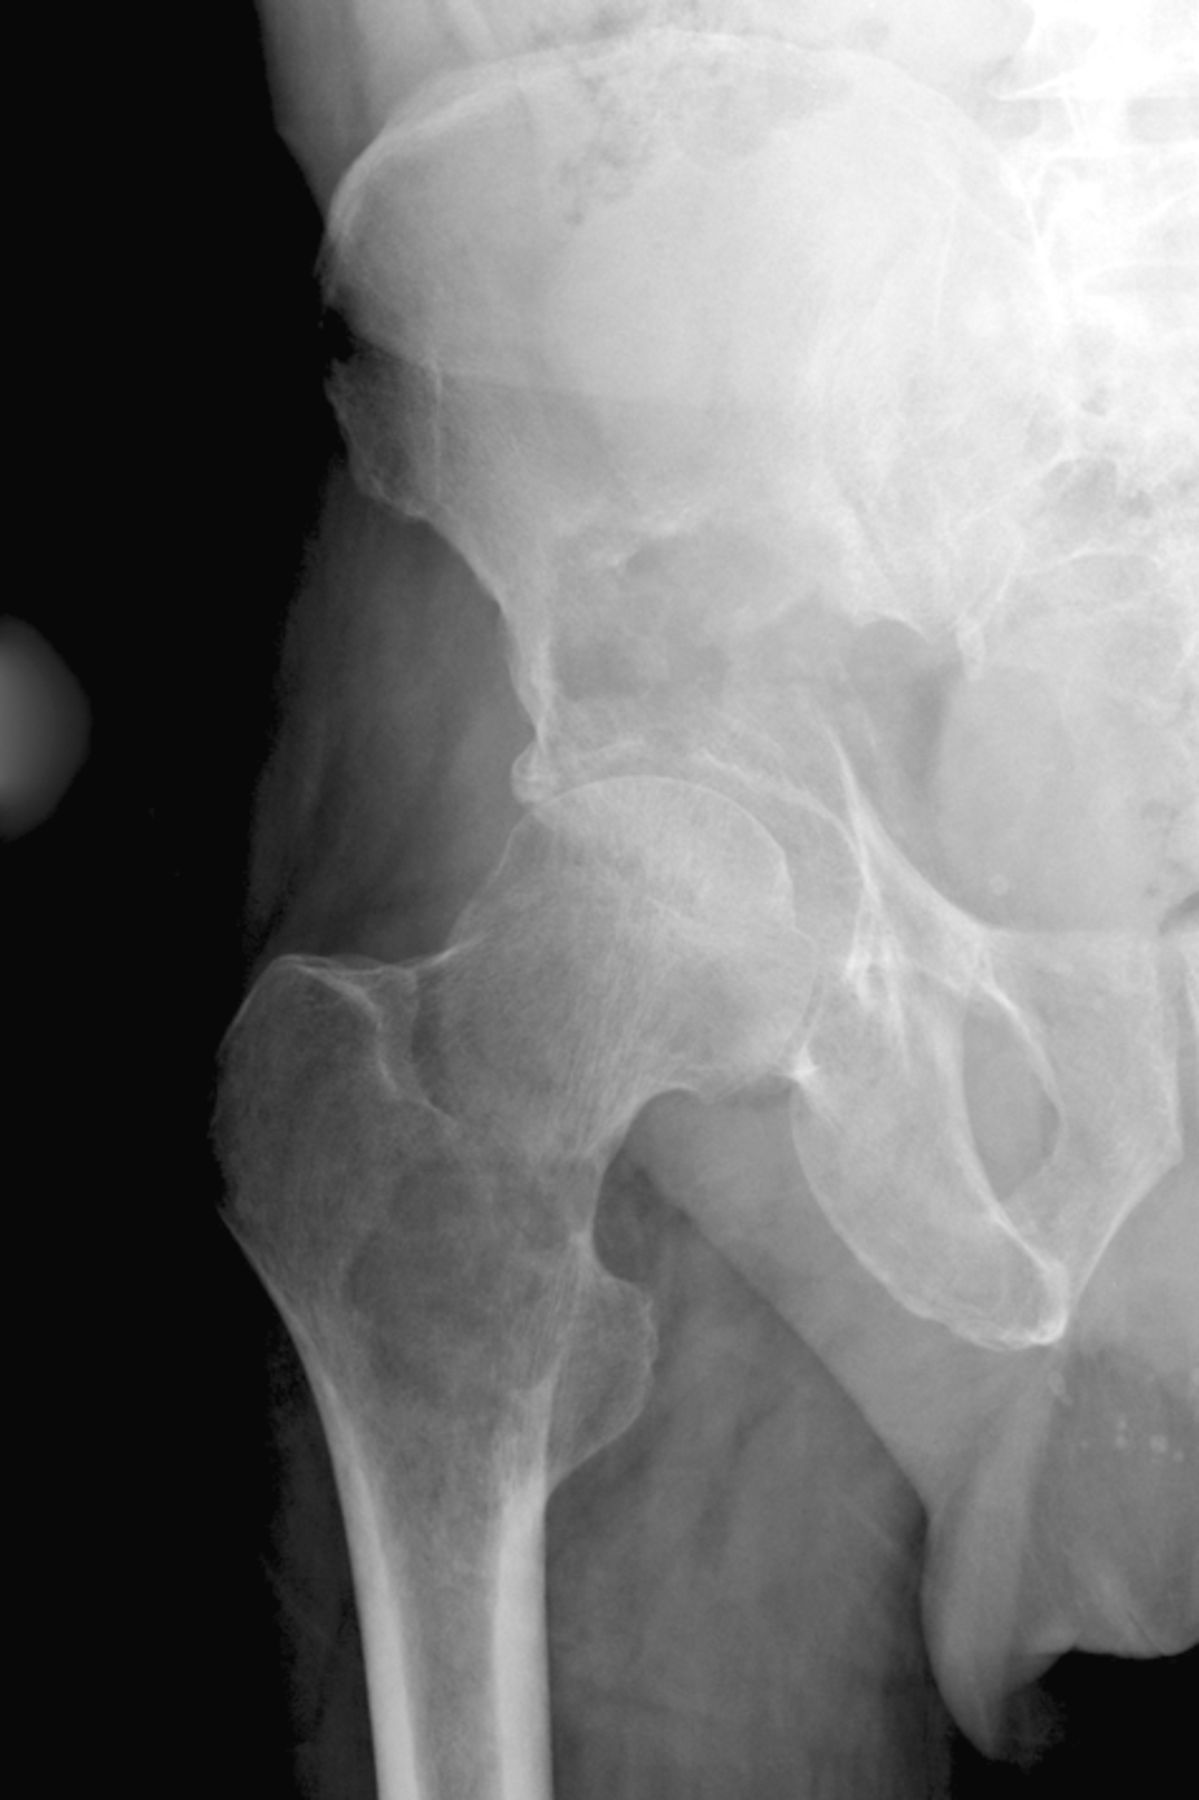 Figs. 2a - 2b 
          Case 2. Radiographs a) on presentation,
showing a pathological fracture of the right acetabulum and a lytic
lesion of the ipsilateral proximal femur, and b) at three days after
proximal femoral replacement and acetabular reconstruction using
a Graft Augmentation Prosthesis and the Harrington pin technique.
        